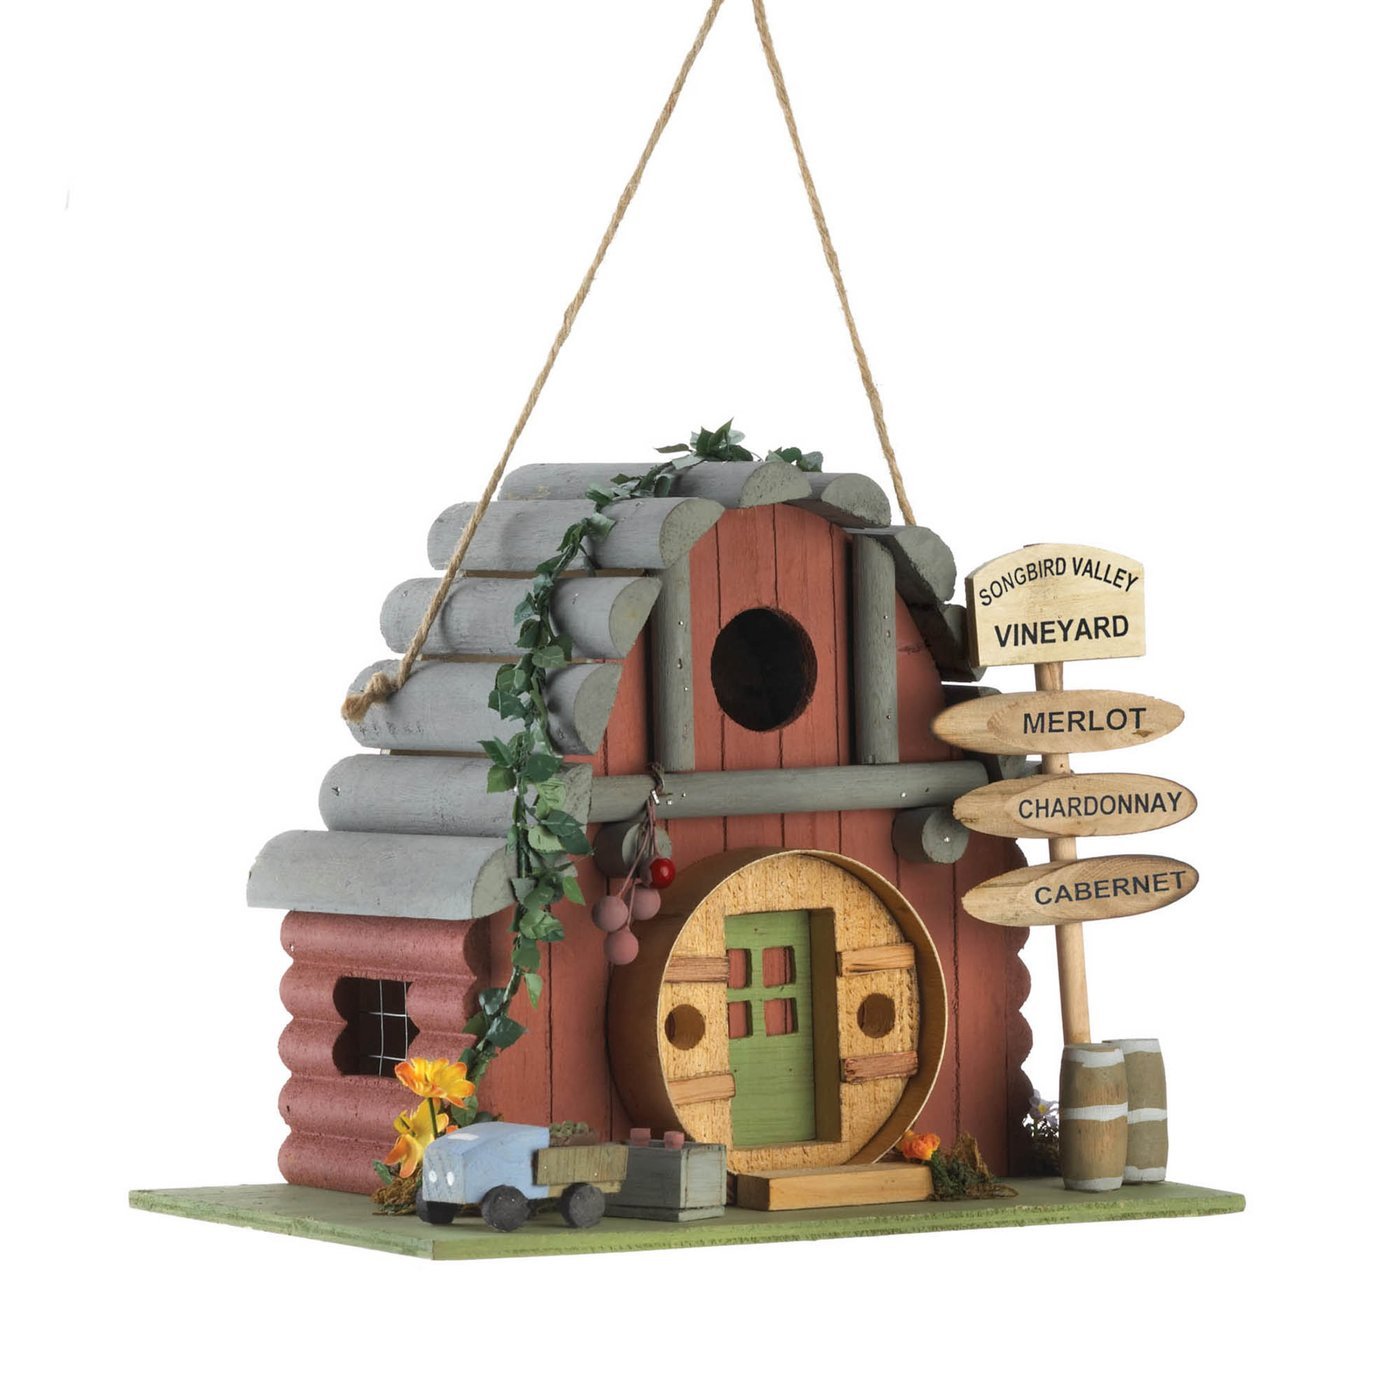 Vintage Winery Log Cabin-Style Bird House - $34.73